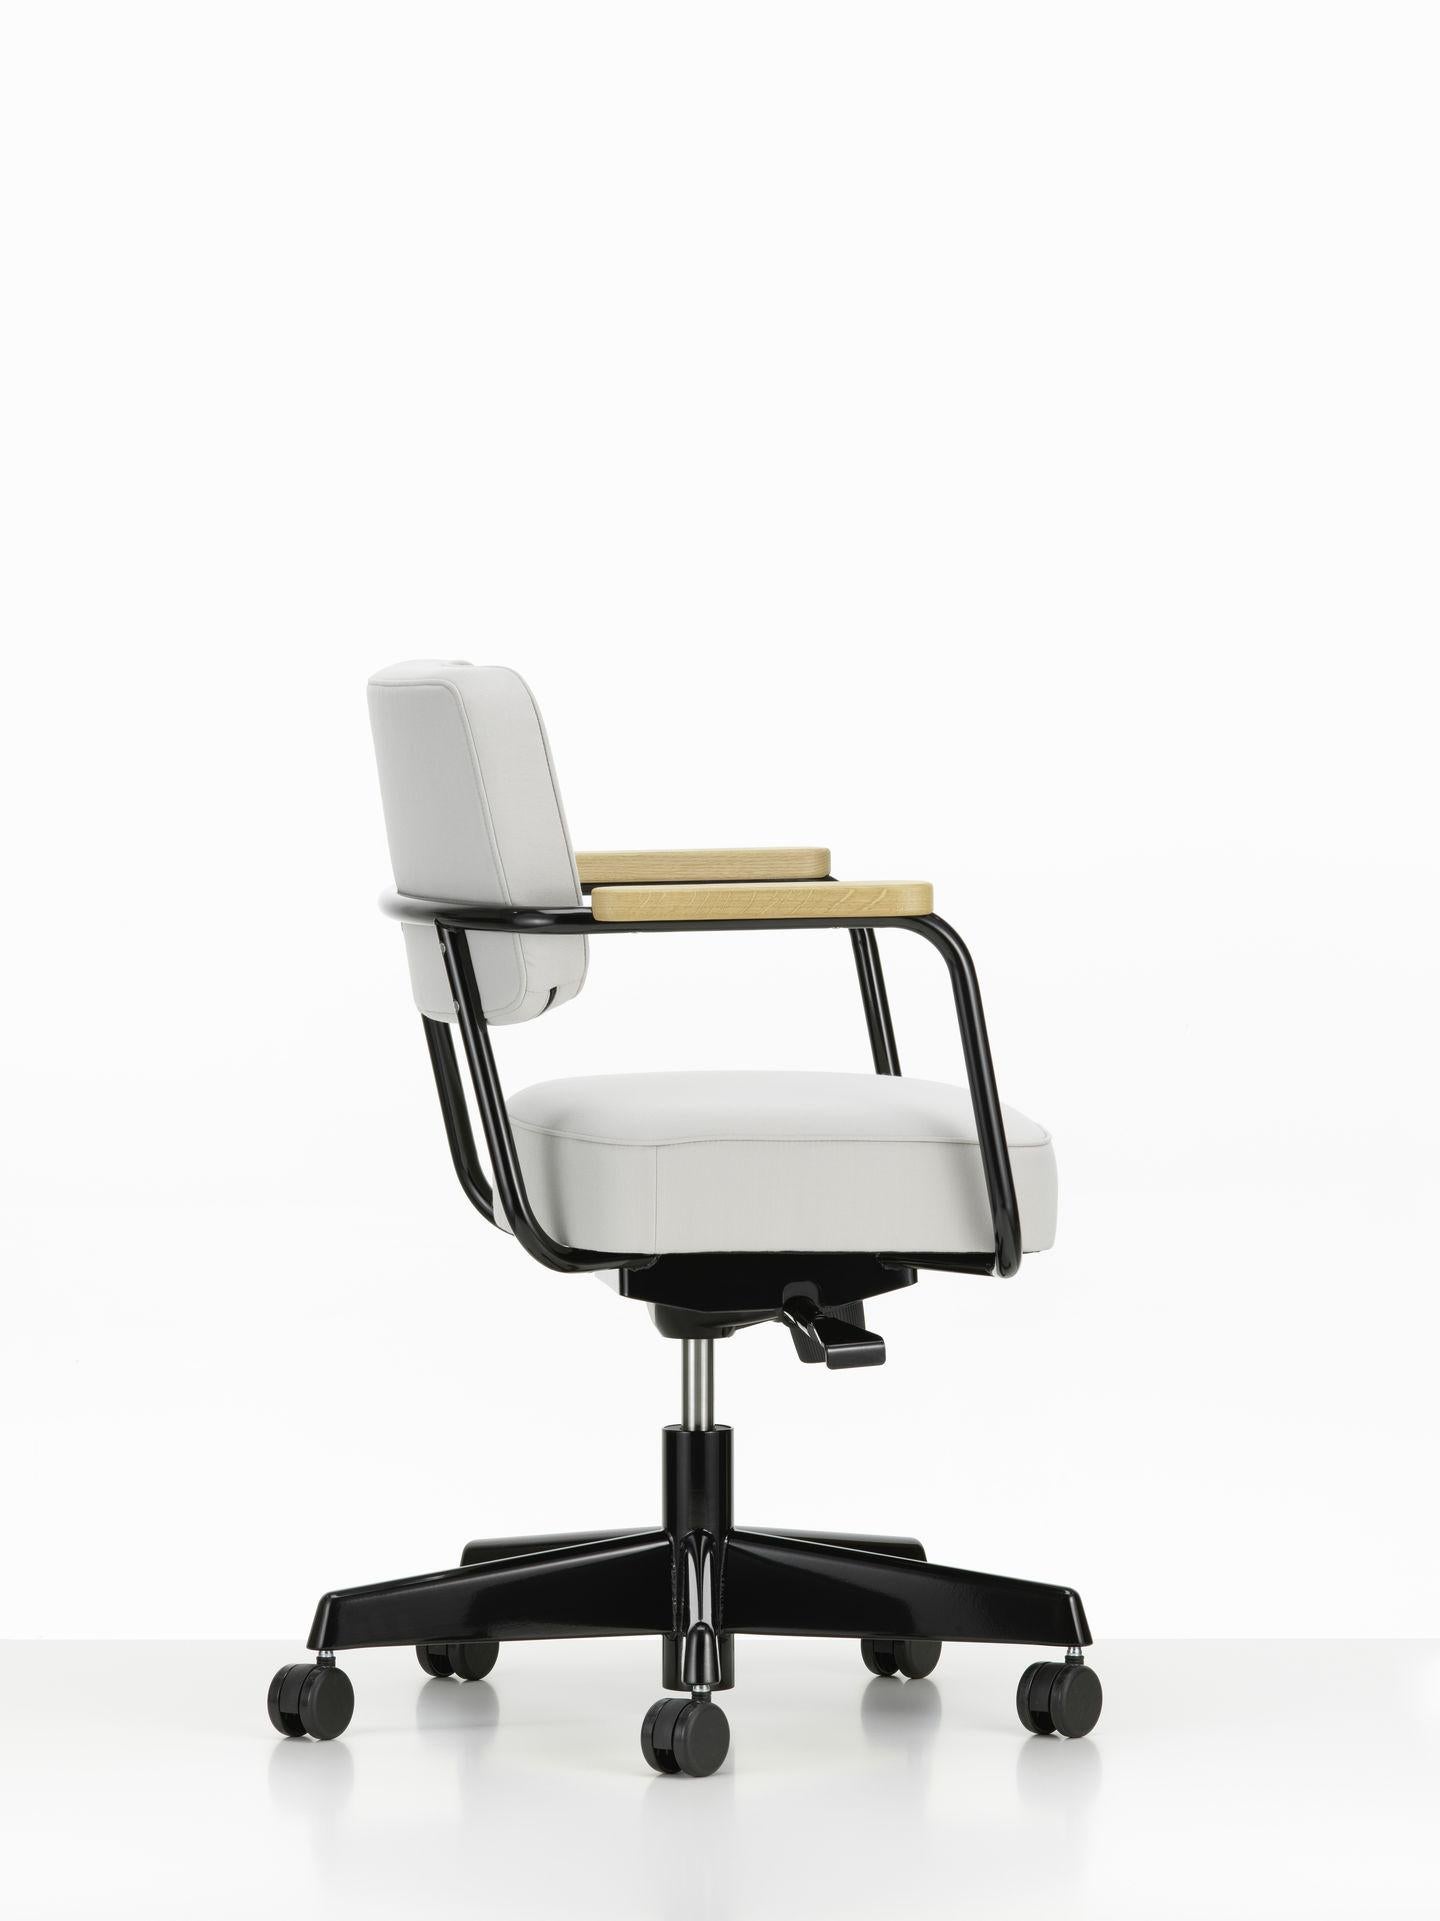 Steel Jean Prouvé Fauteuil Direction Pivotant Office Chair by Vitra